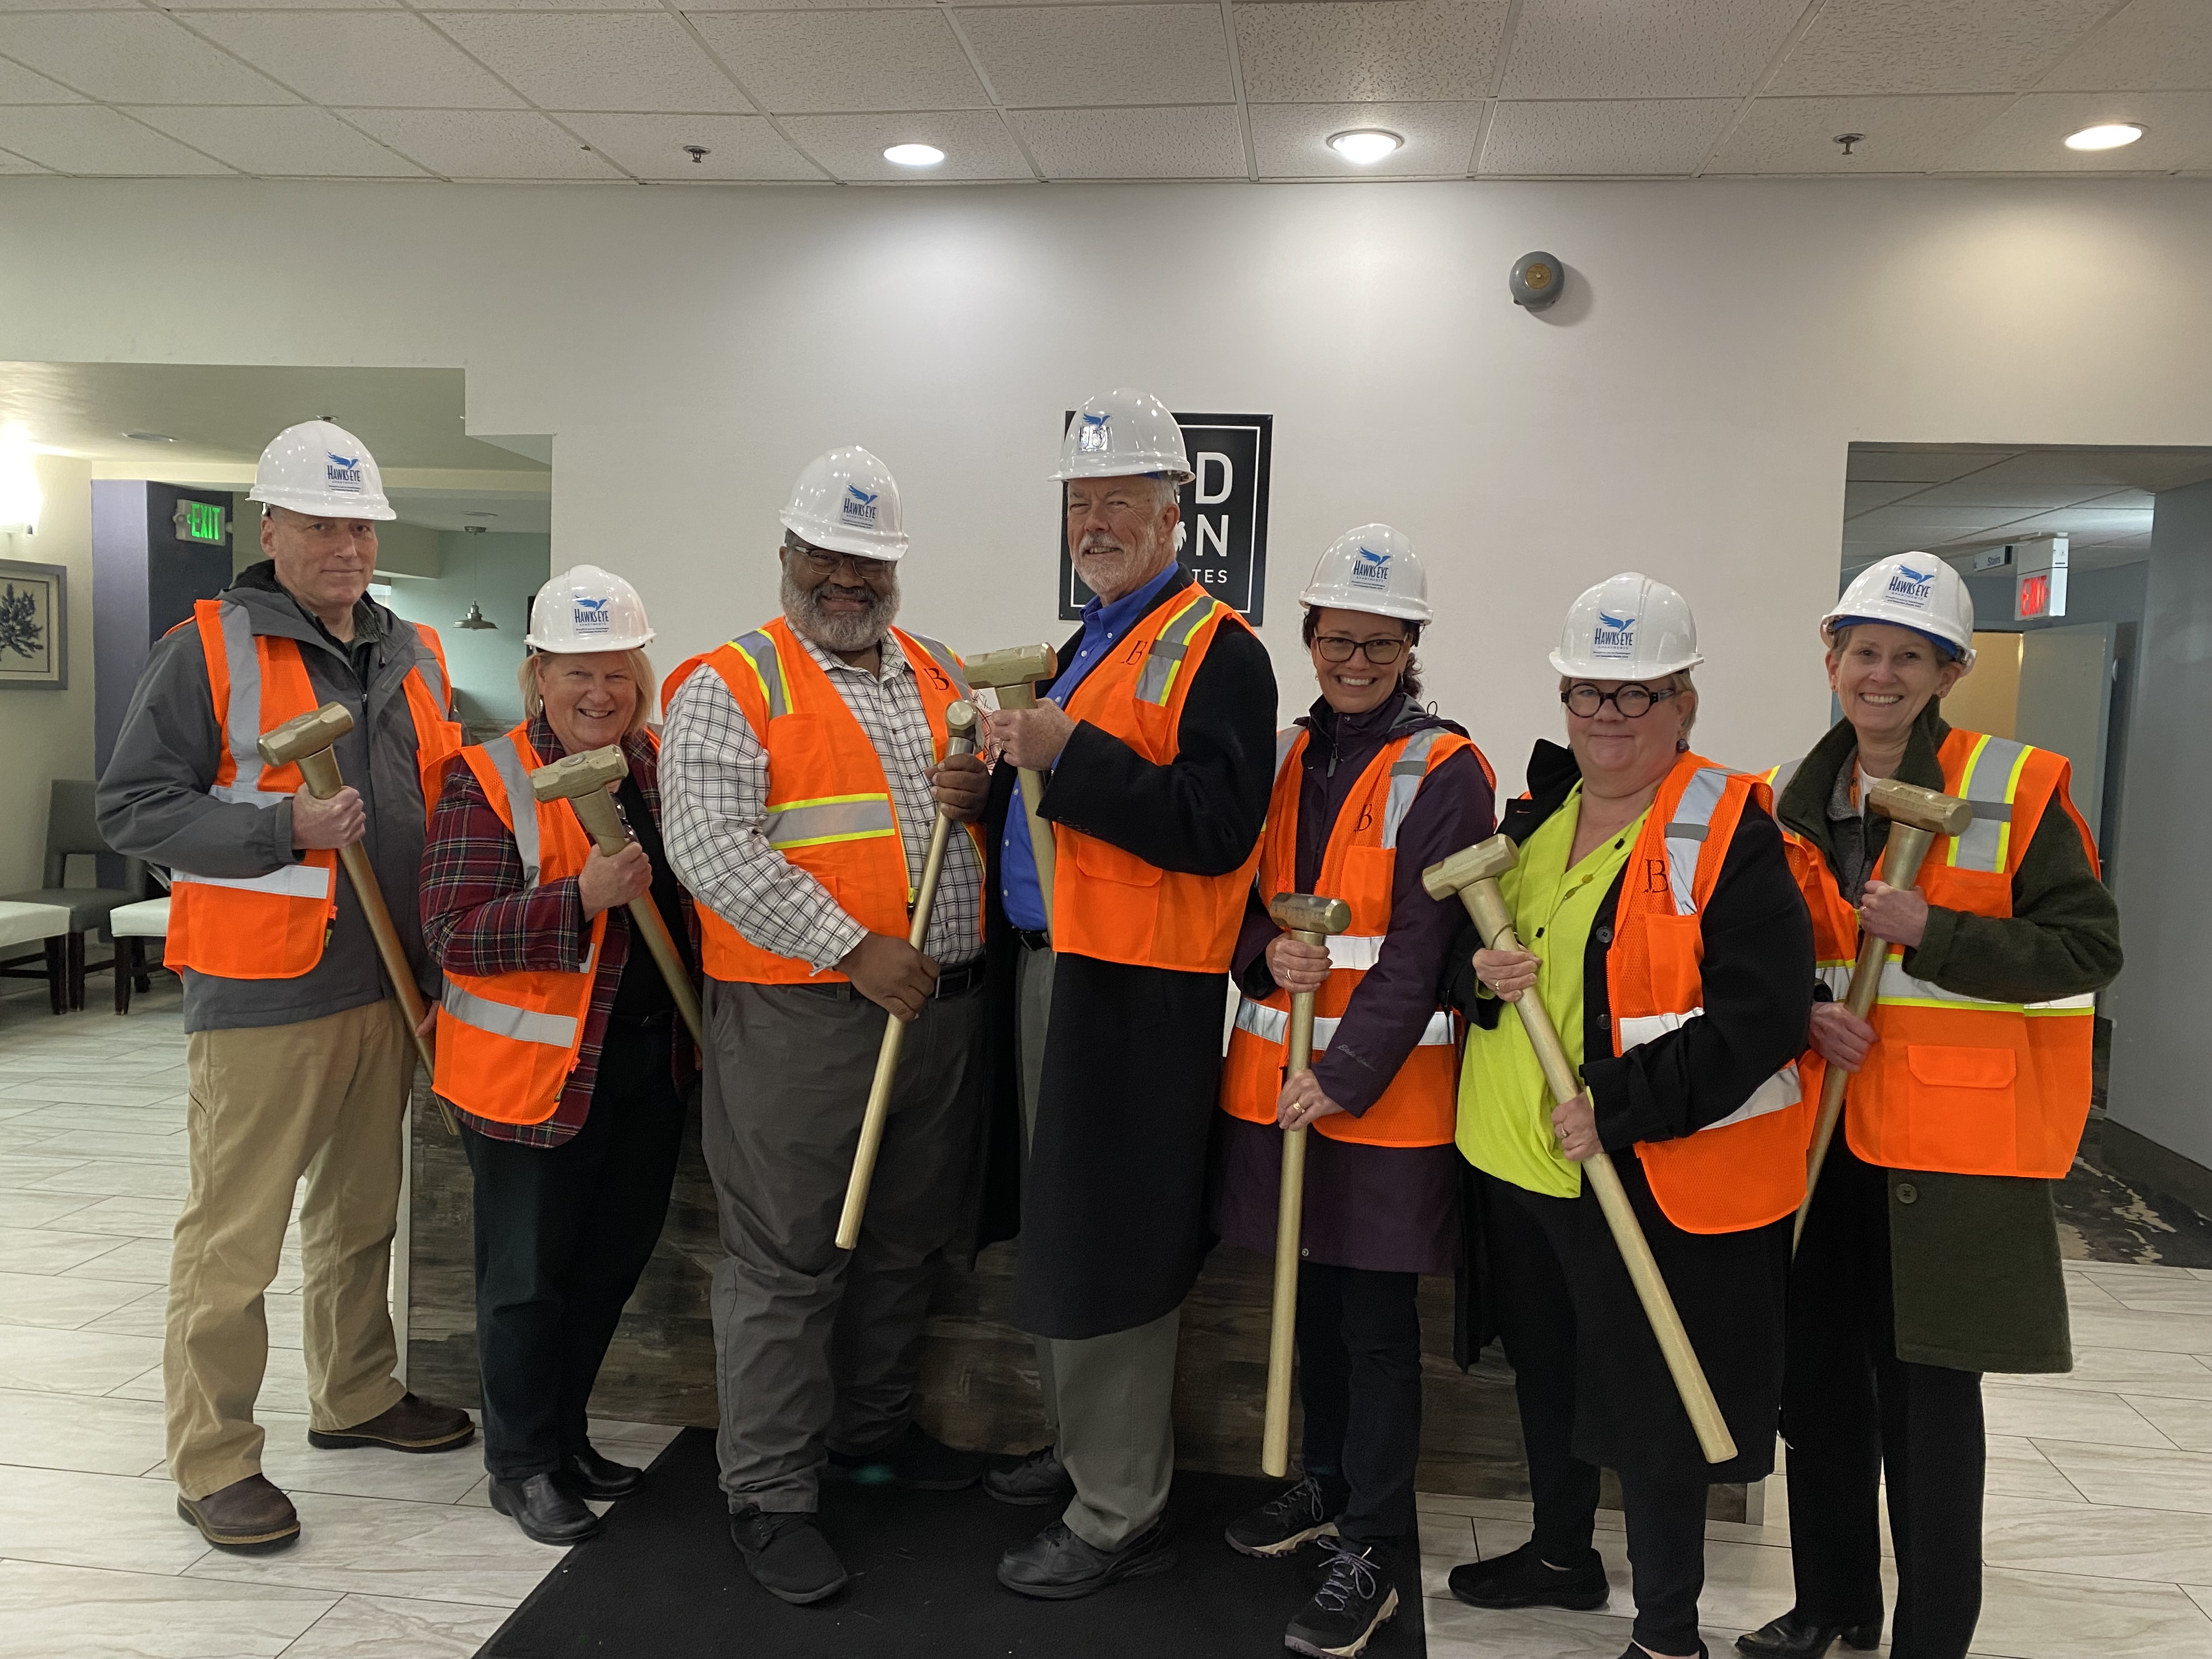 CareOregon, Columbia Pacific CCO, City of Seaside, Providence Hospital and Clatsop County Leaders Standing together holding gold sledgehammers.